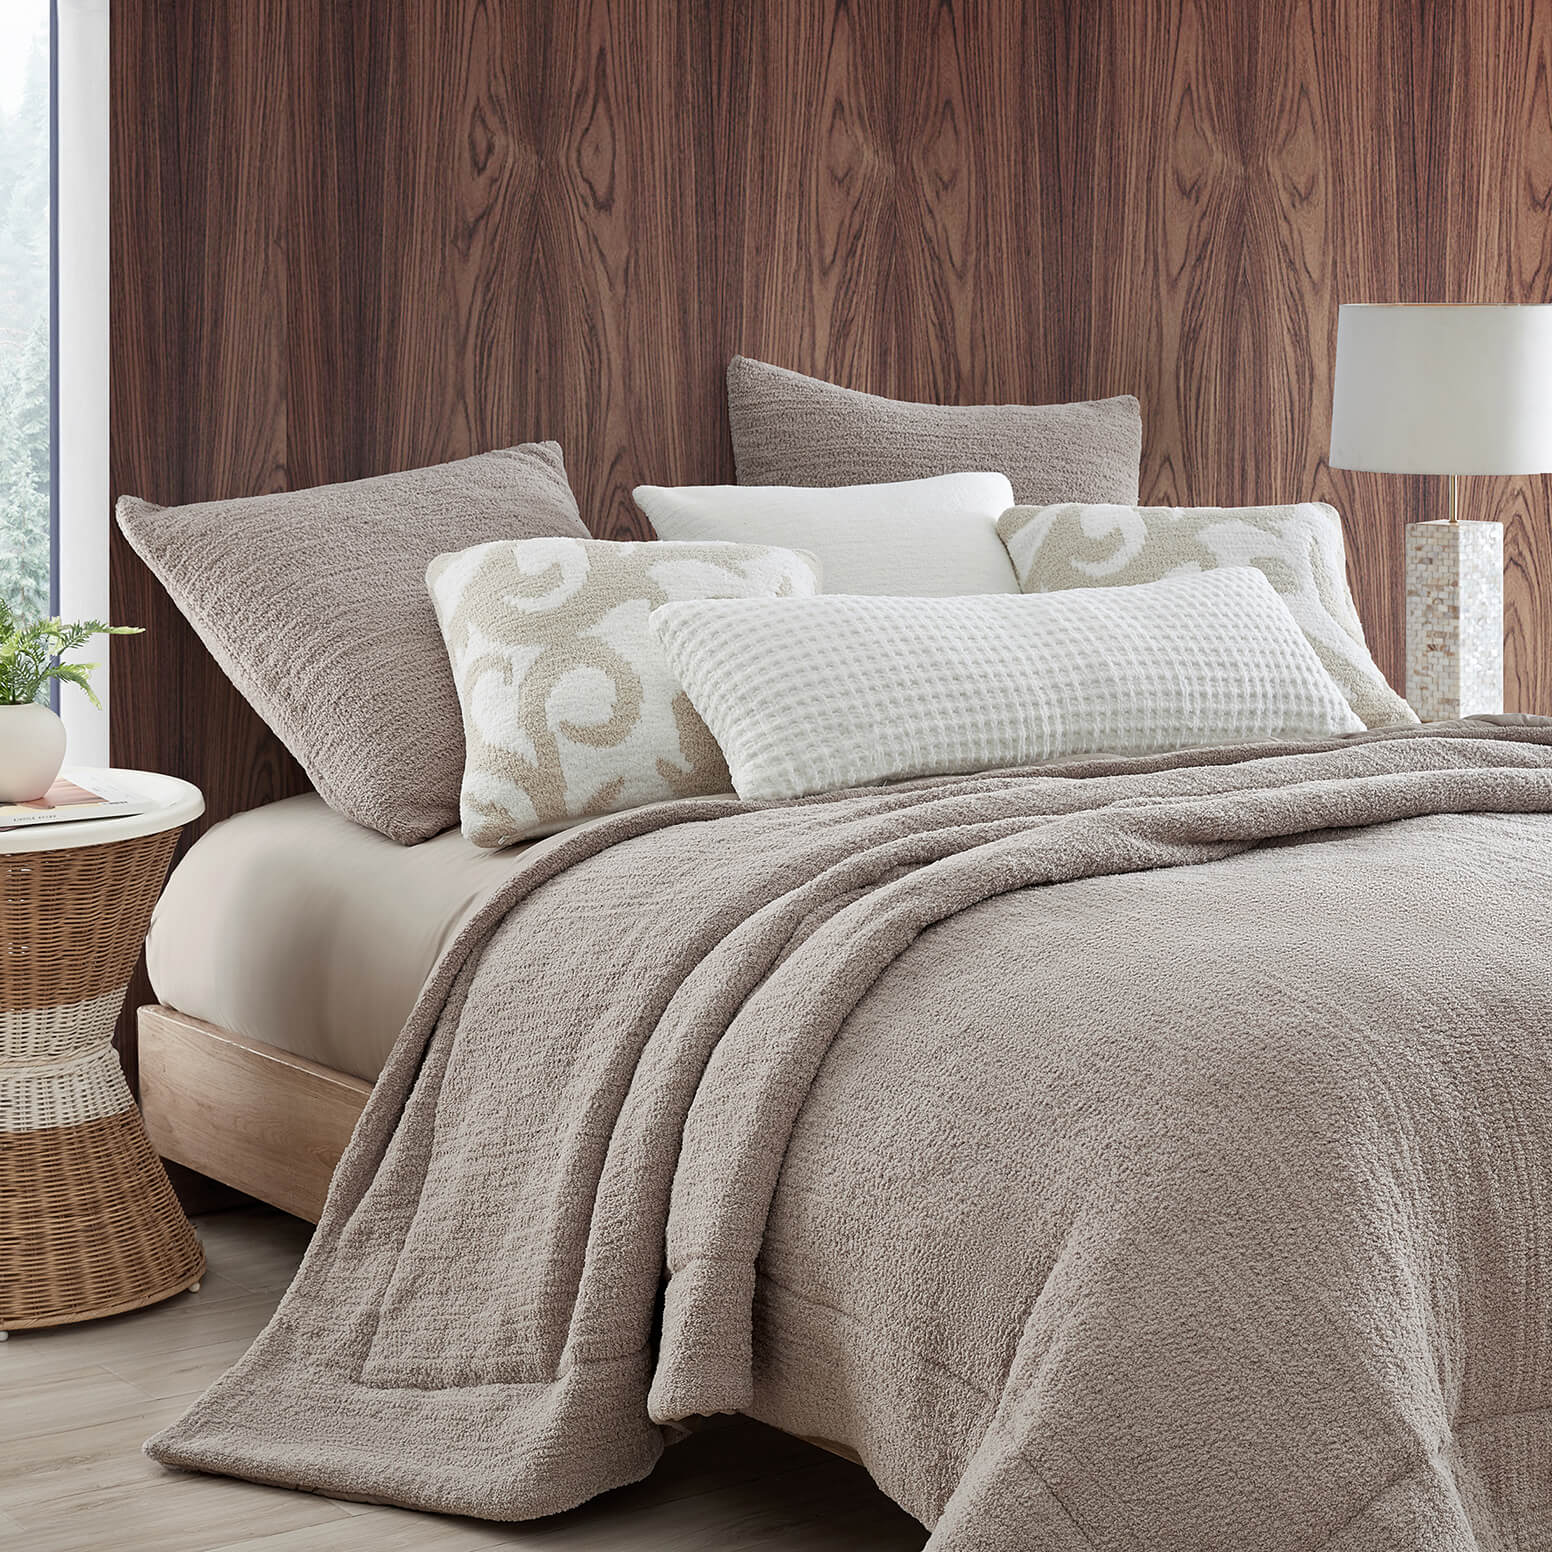 Snug Comforter in Taupe. Taupe comforter. Earthy neutral bedding inspiration. Cabin in the woods bedroom decor. Cozy winter bedroom decor. Taupe bedding. Neutral bedding. Beige and Taupe neutral bedding. Beige bedroom accents.